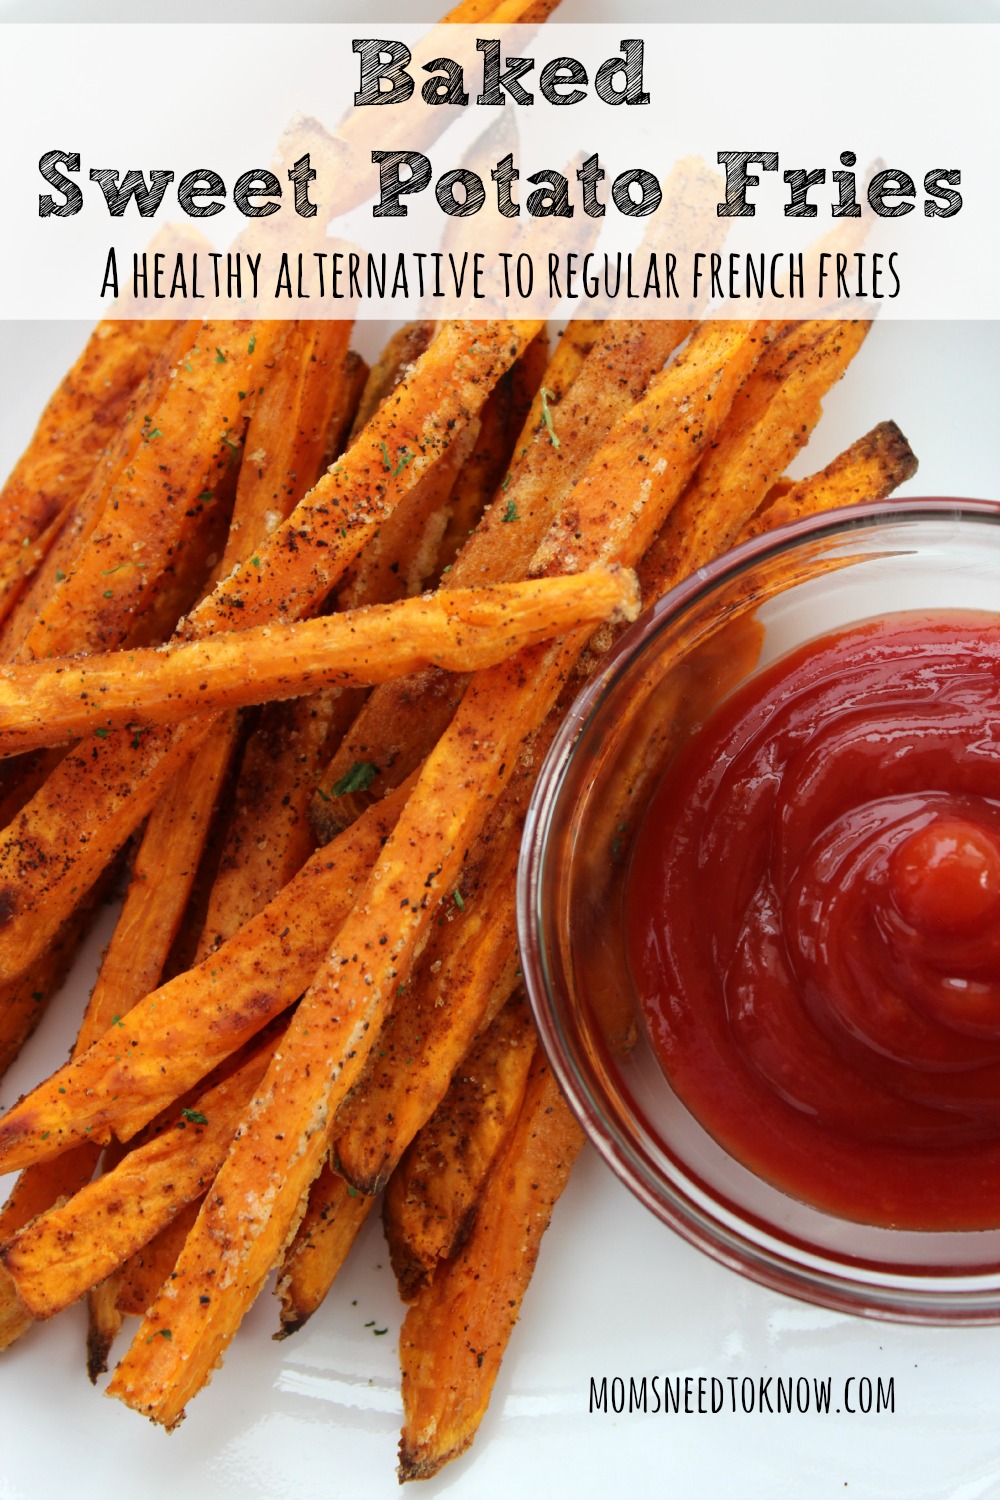 How-To-Make-Baked-Sweet-Potato-Fries